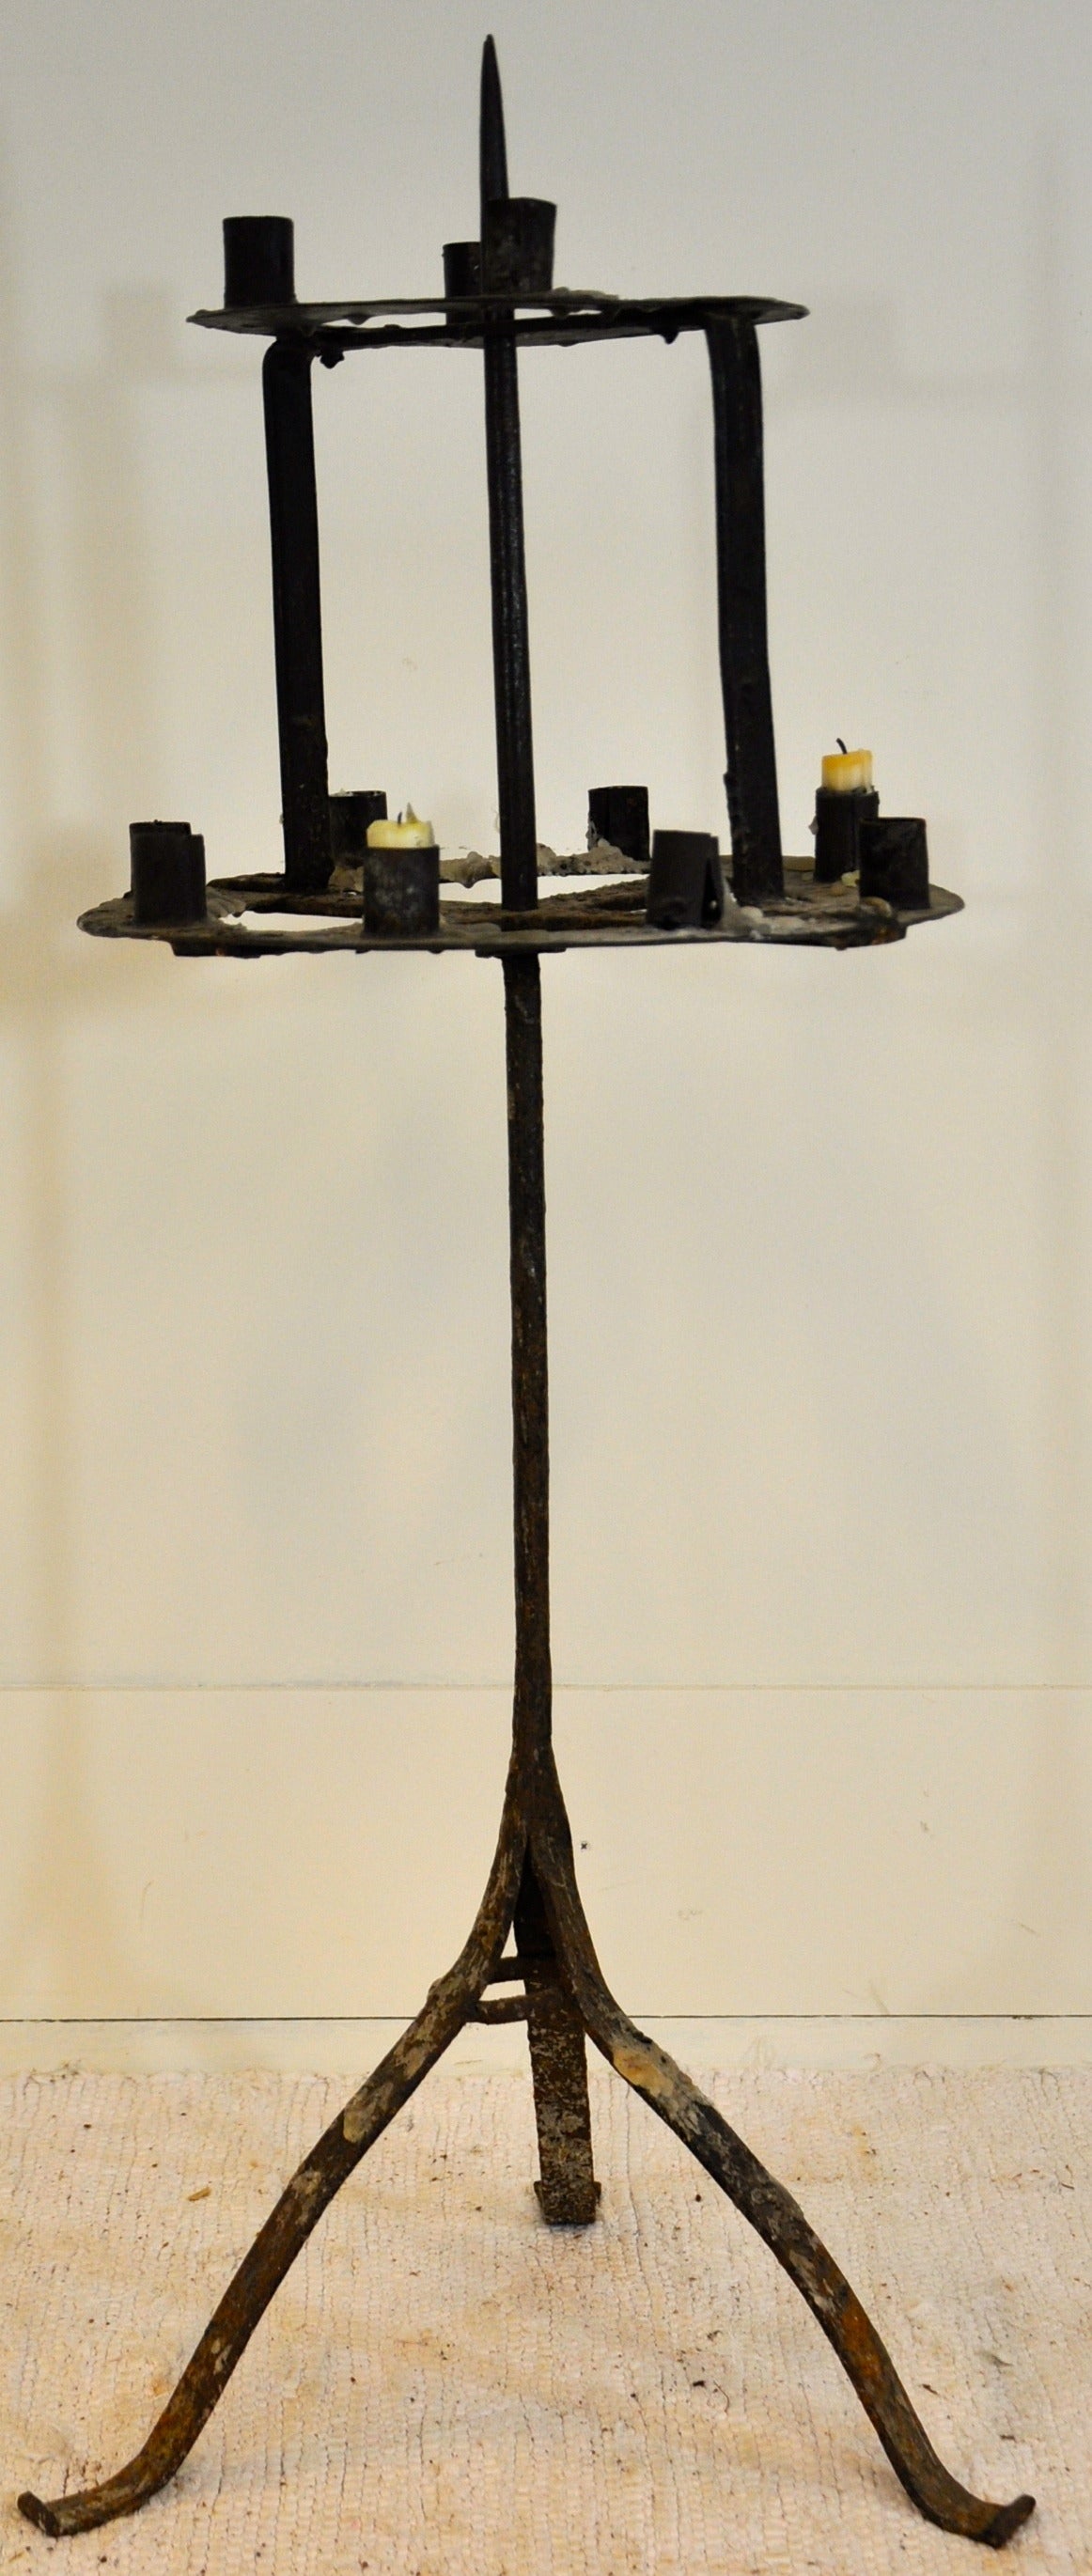 A French hand-forged iron candle Stand for ten candles, that can swivel two around
the central upright axe. A rustic and charming piece of work from the mountains in France.